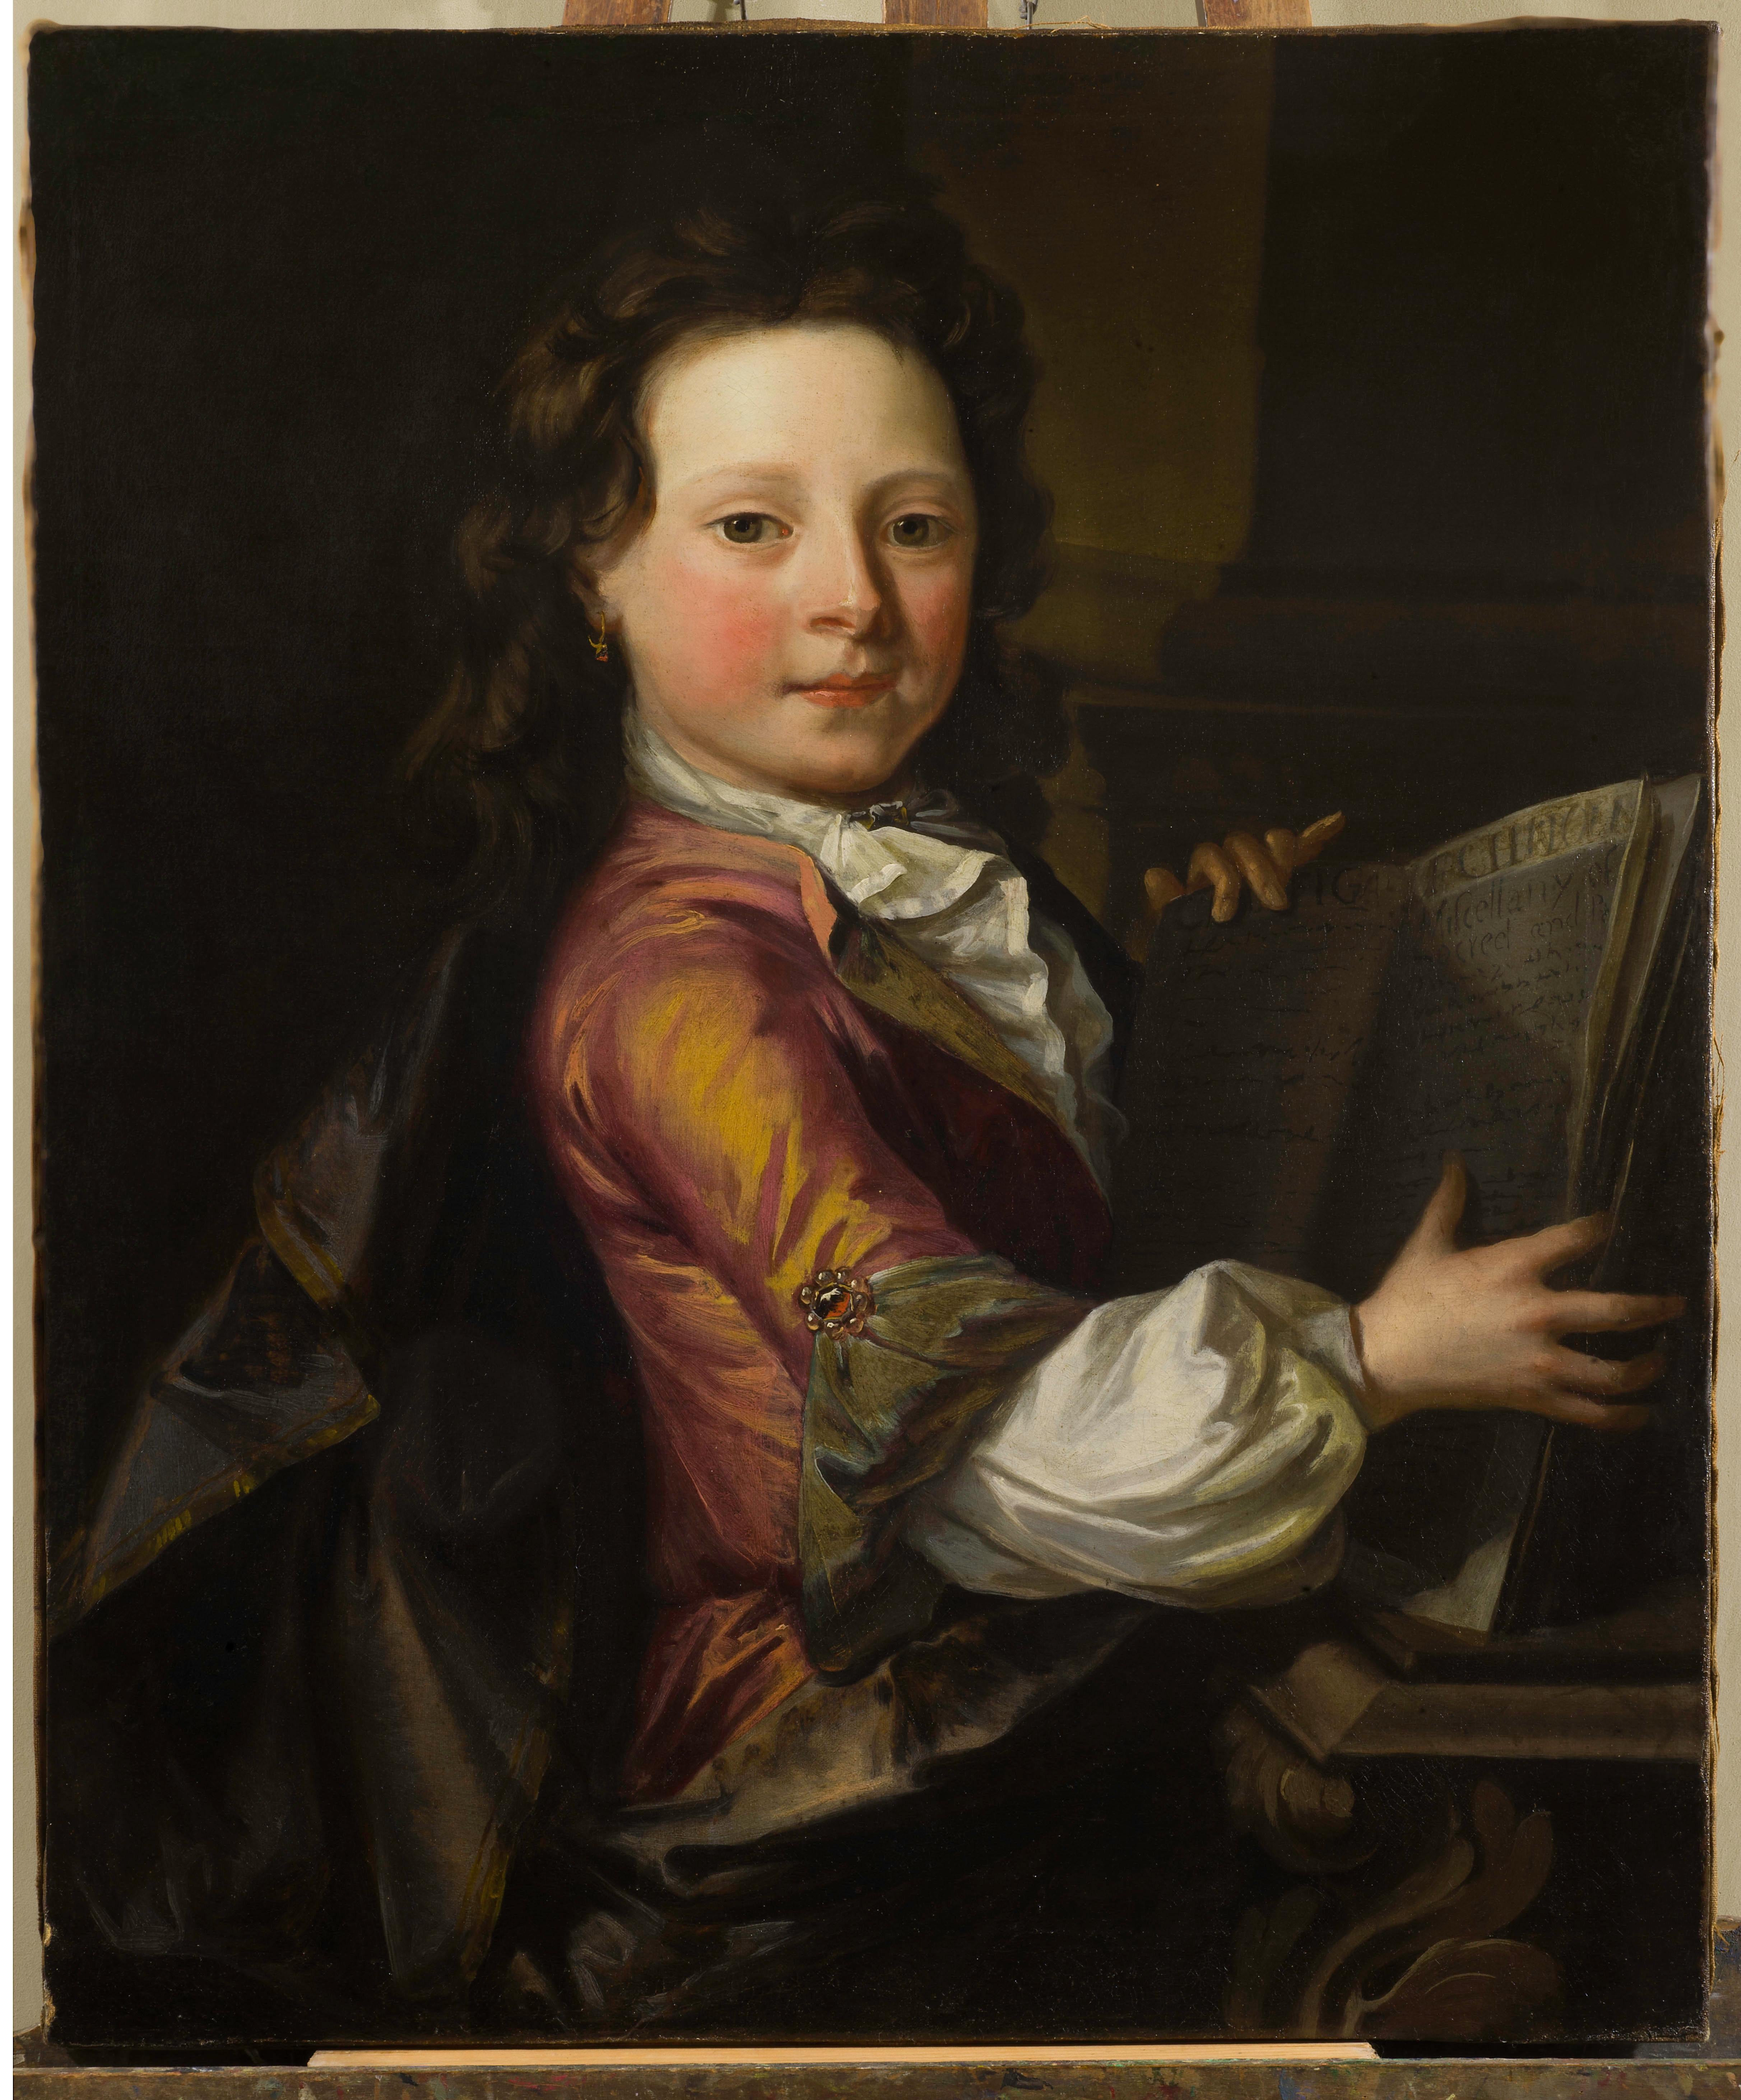 John Clostermann
(Osnabrück 1660 - 1711 London)

Portrait of a boy, maybe Charles Hinde
Oil on canvas, 61 x 74,6 cm

John Closterman (also Klosterman) was a portrait painter of the late 17th and early 18th centuries. He primarily portrayed English